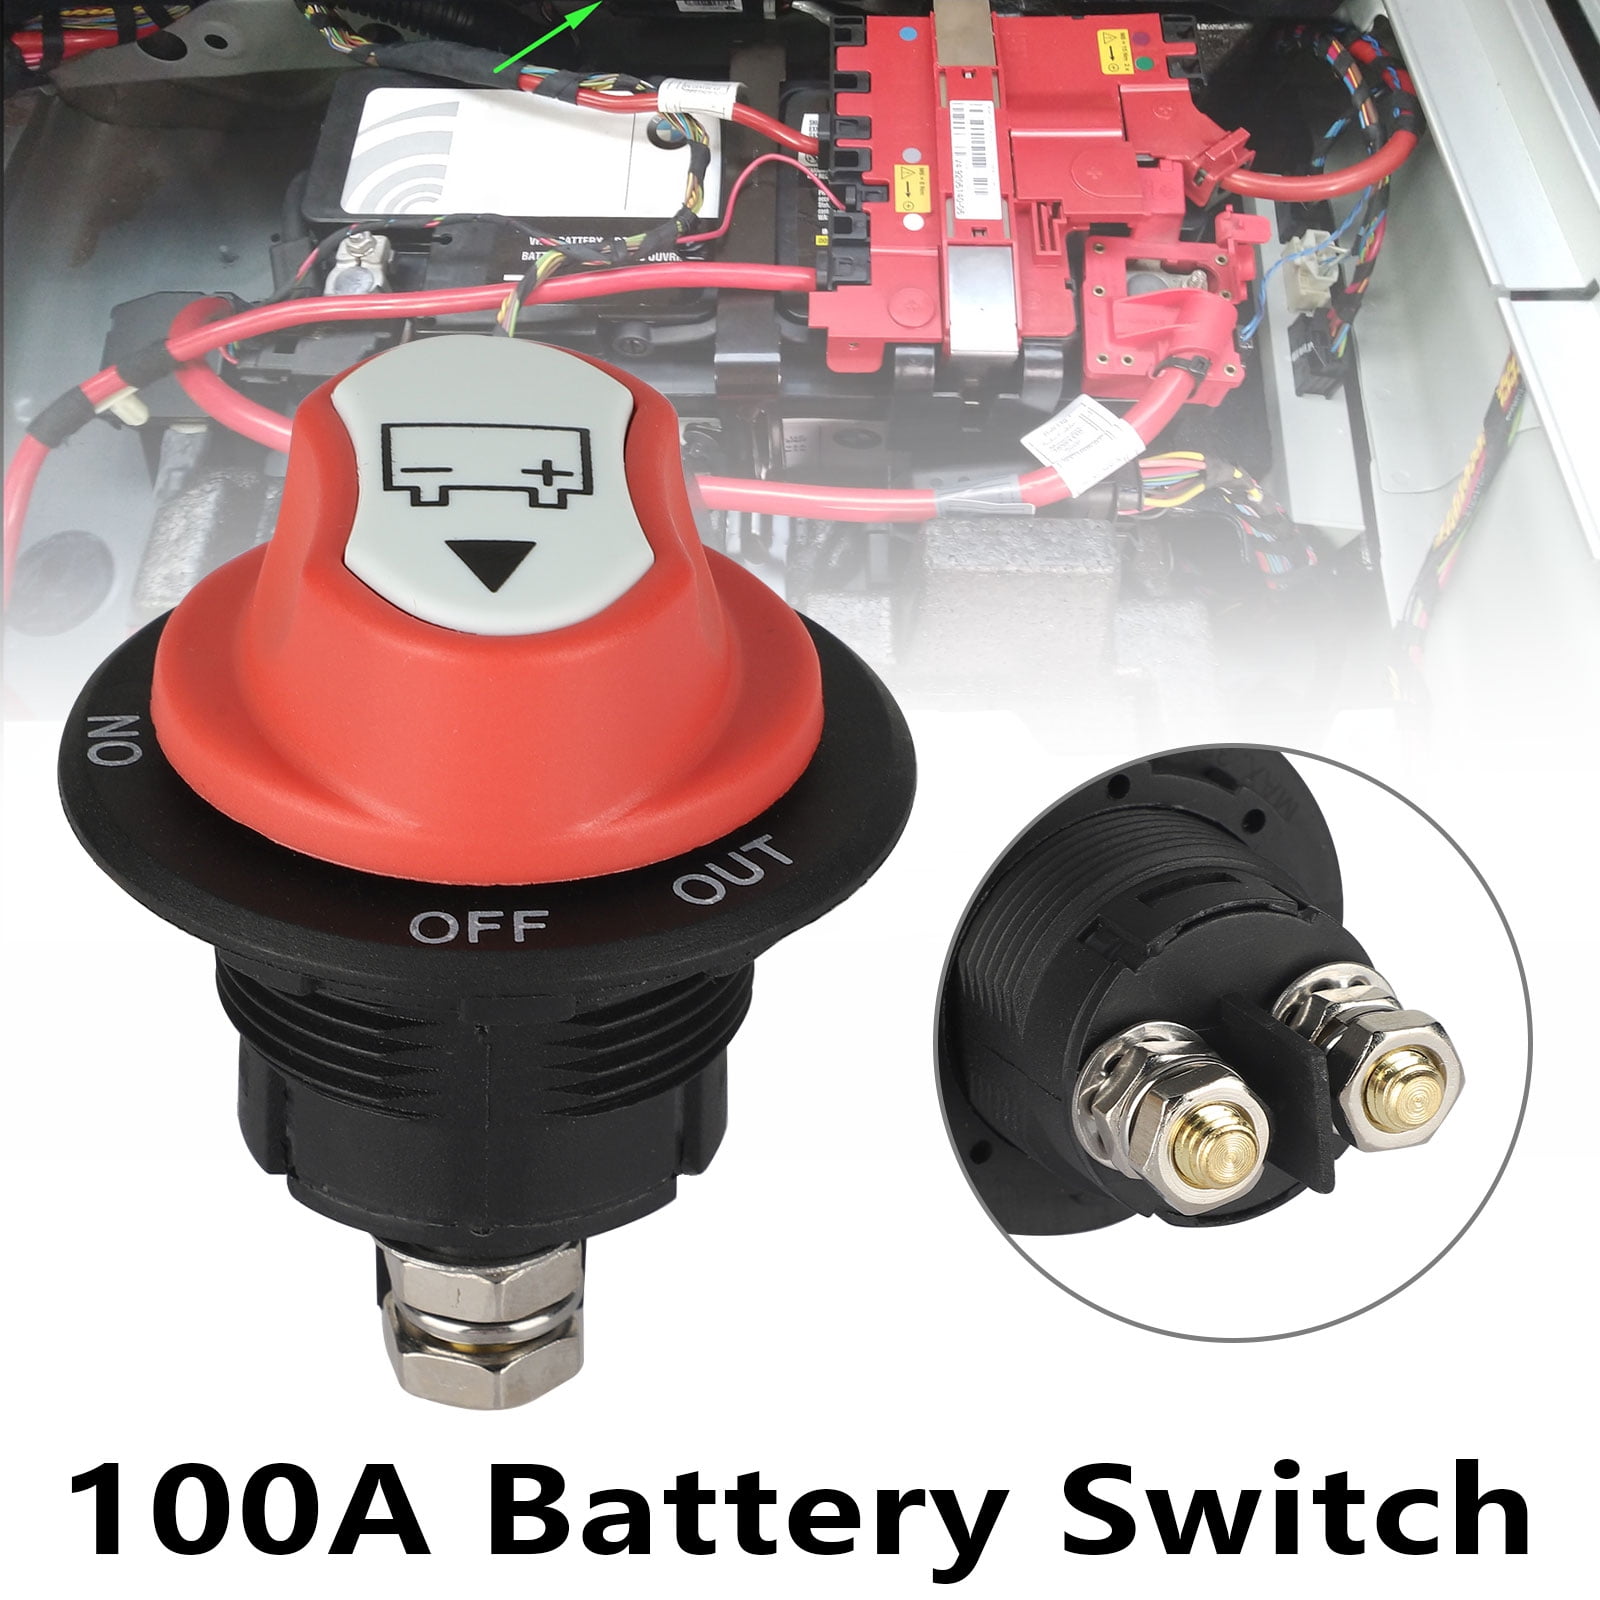 Car Battery Disconnect Switch, TSV 50A/100A/200A Battery Switch, Waterproof  Heavy Duty Battery Power Cut Master Switch Disconnect Isolator for  Motorcycle Marine Boat Camper RV ATV UTV Vehicles - Walmart.com